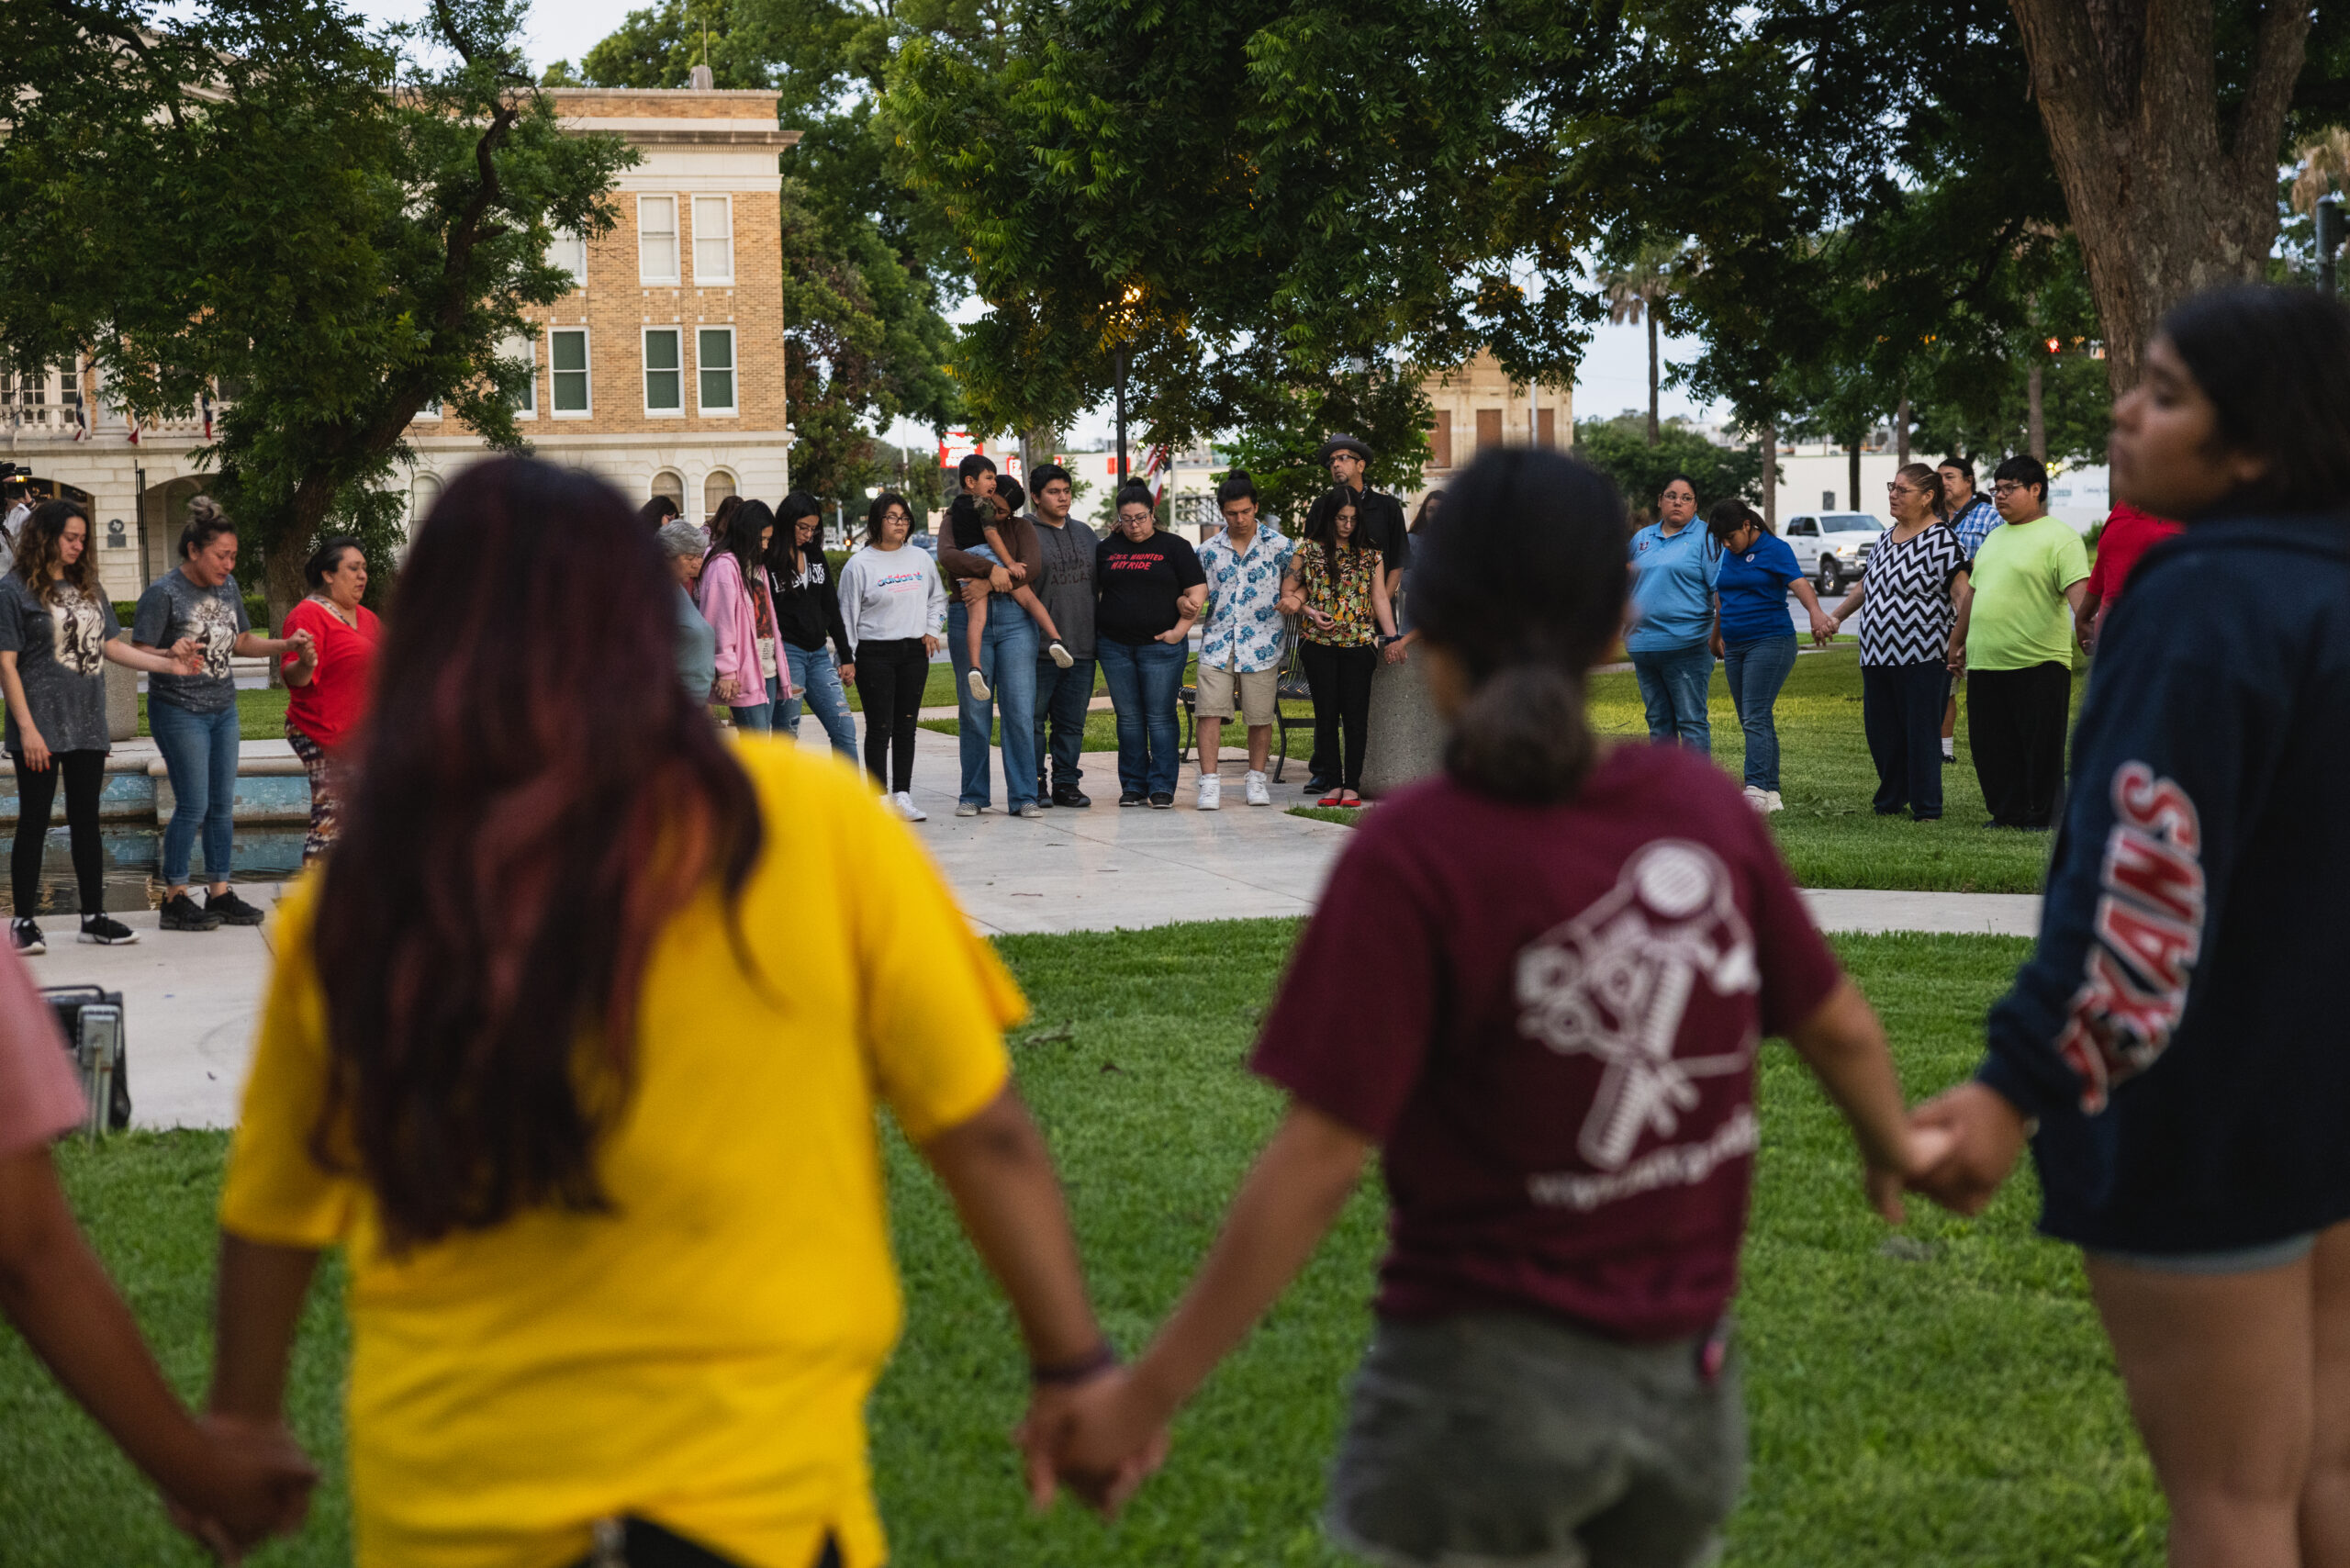 Residents of Uvalde hold hands in a large circle after elementary school mass shooting